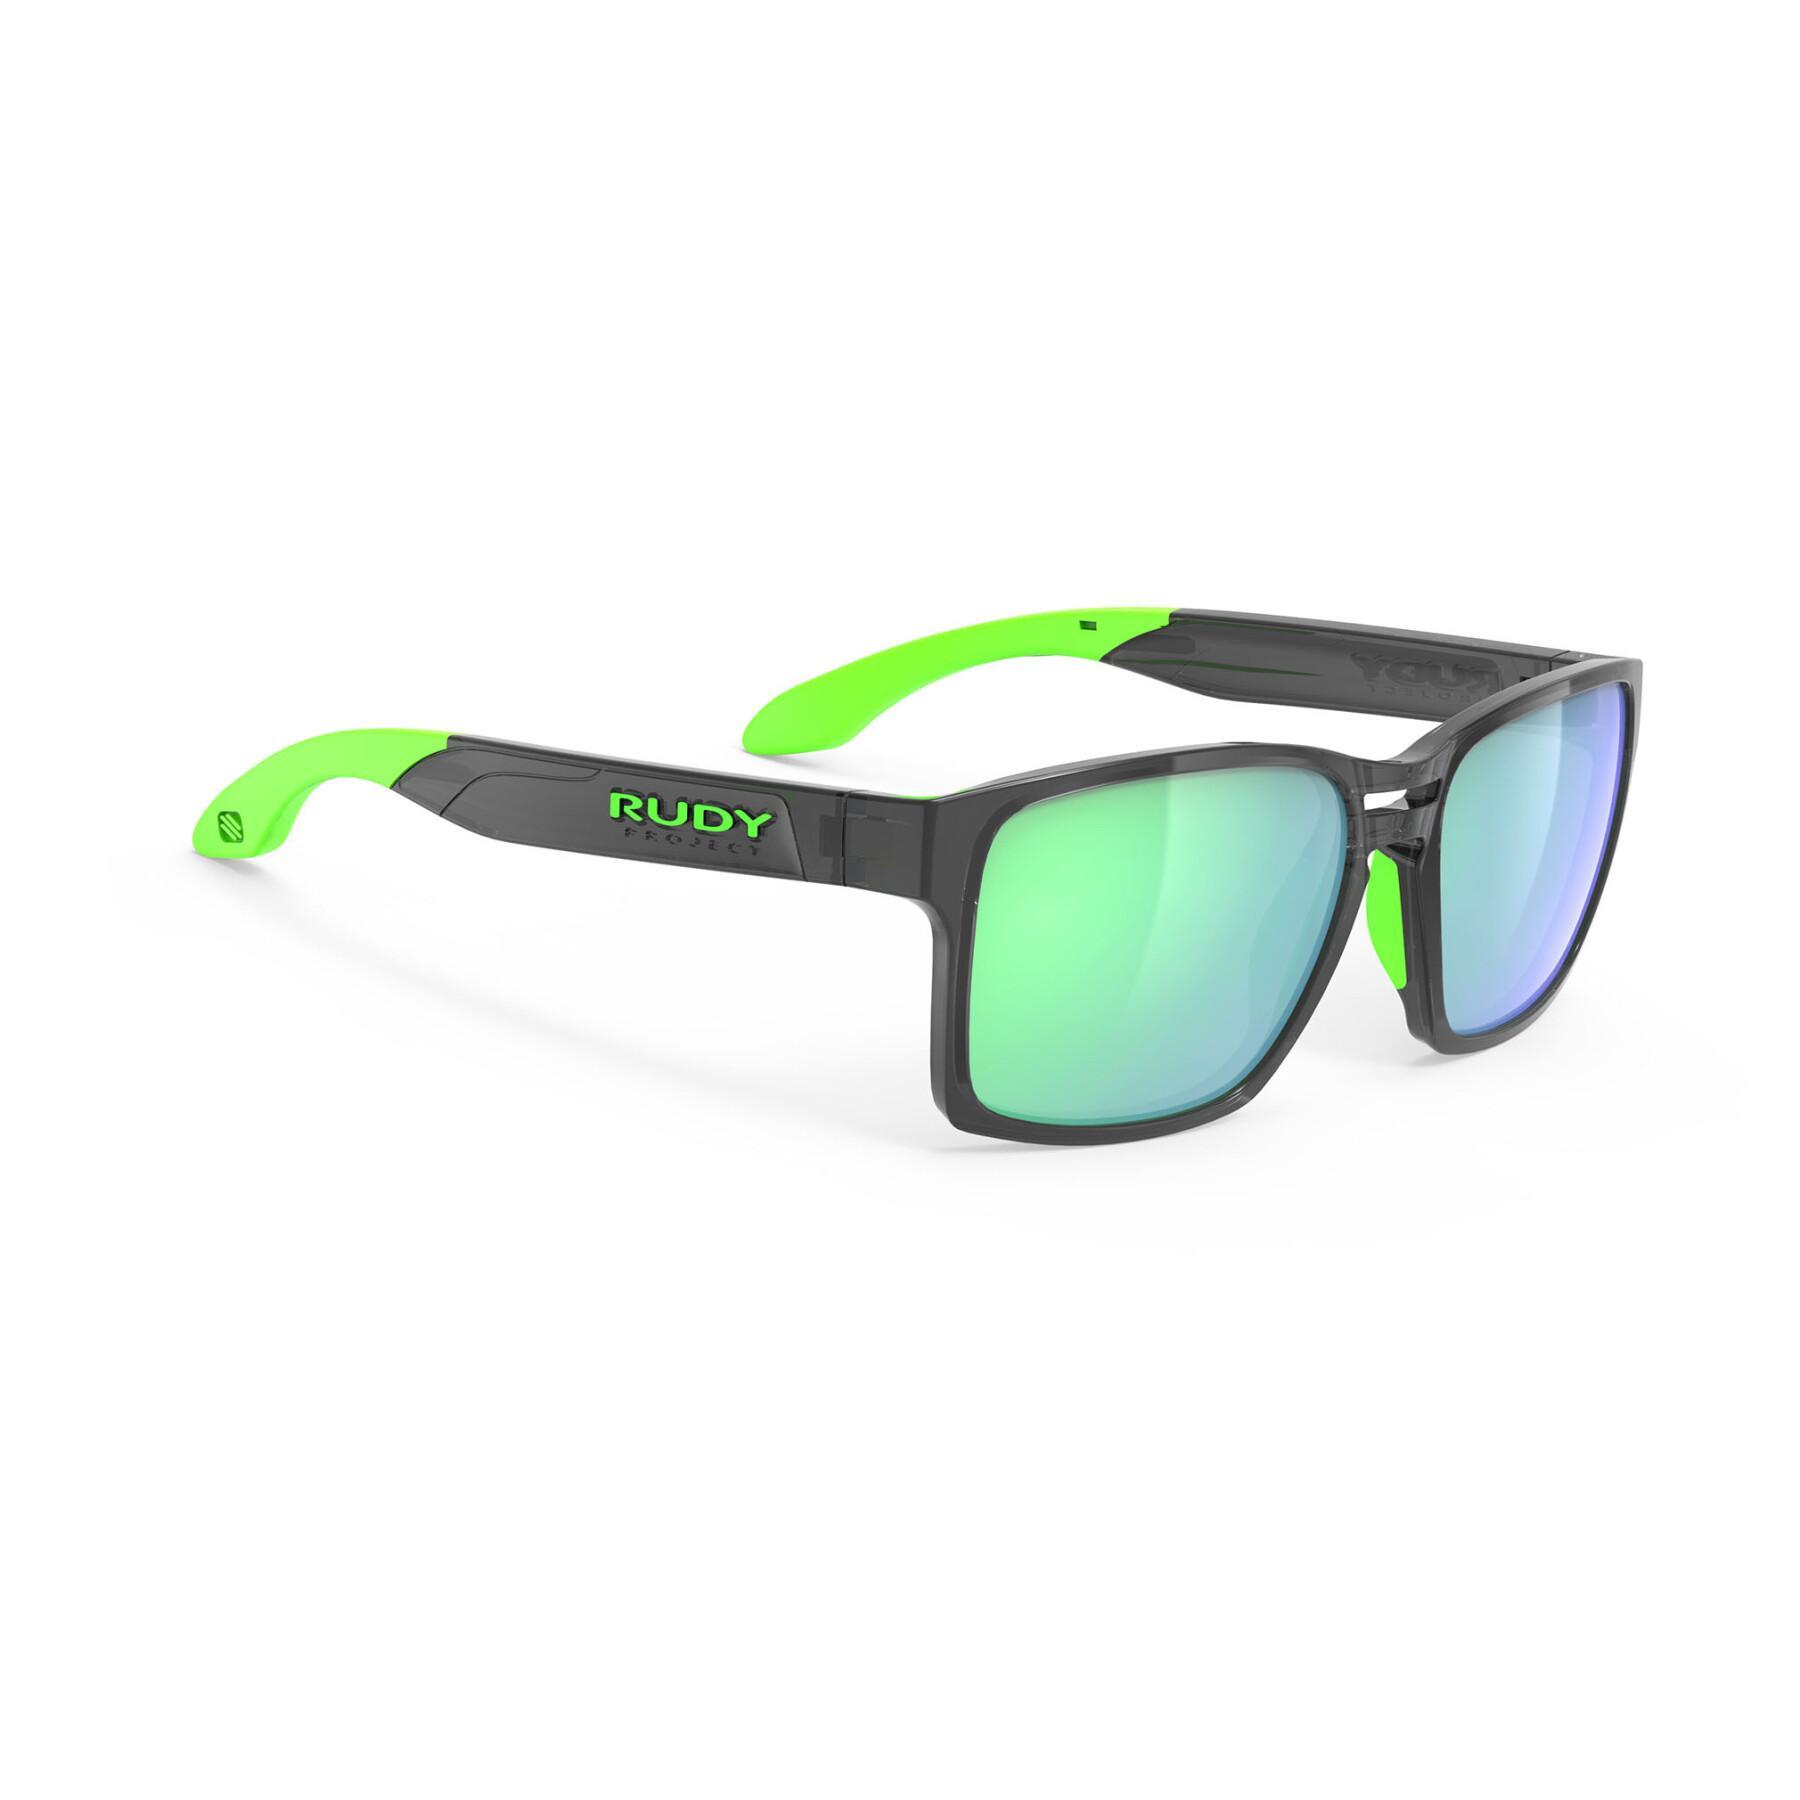 Sunglasses Rudy Project spinair 57 water sports